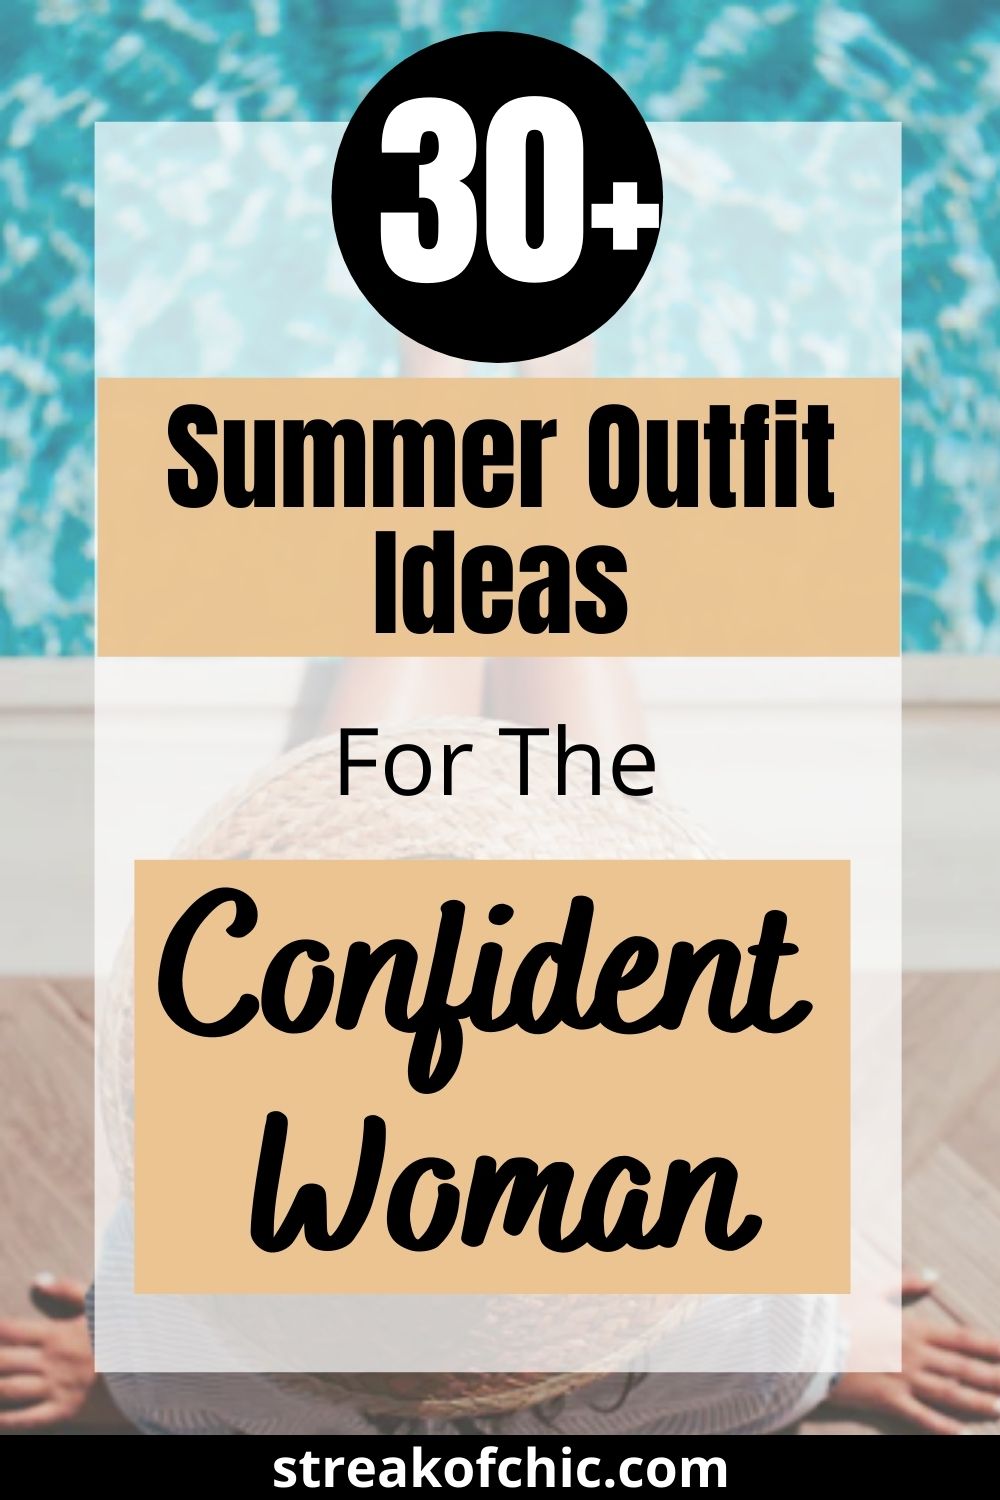 30+ Cute Summer Outfit Ideas to Make You Look Poppin’